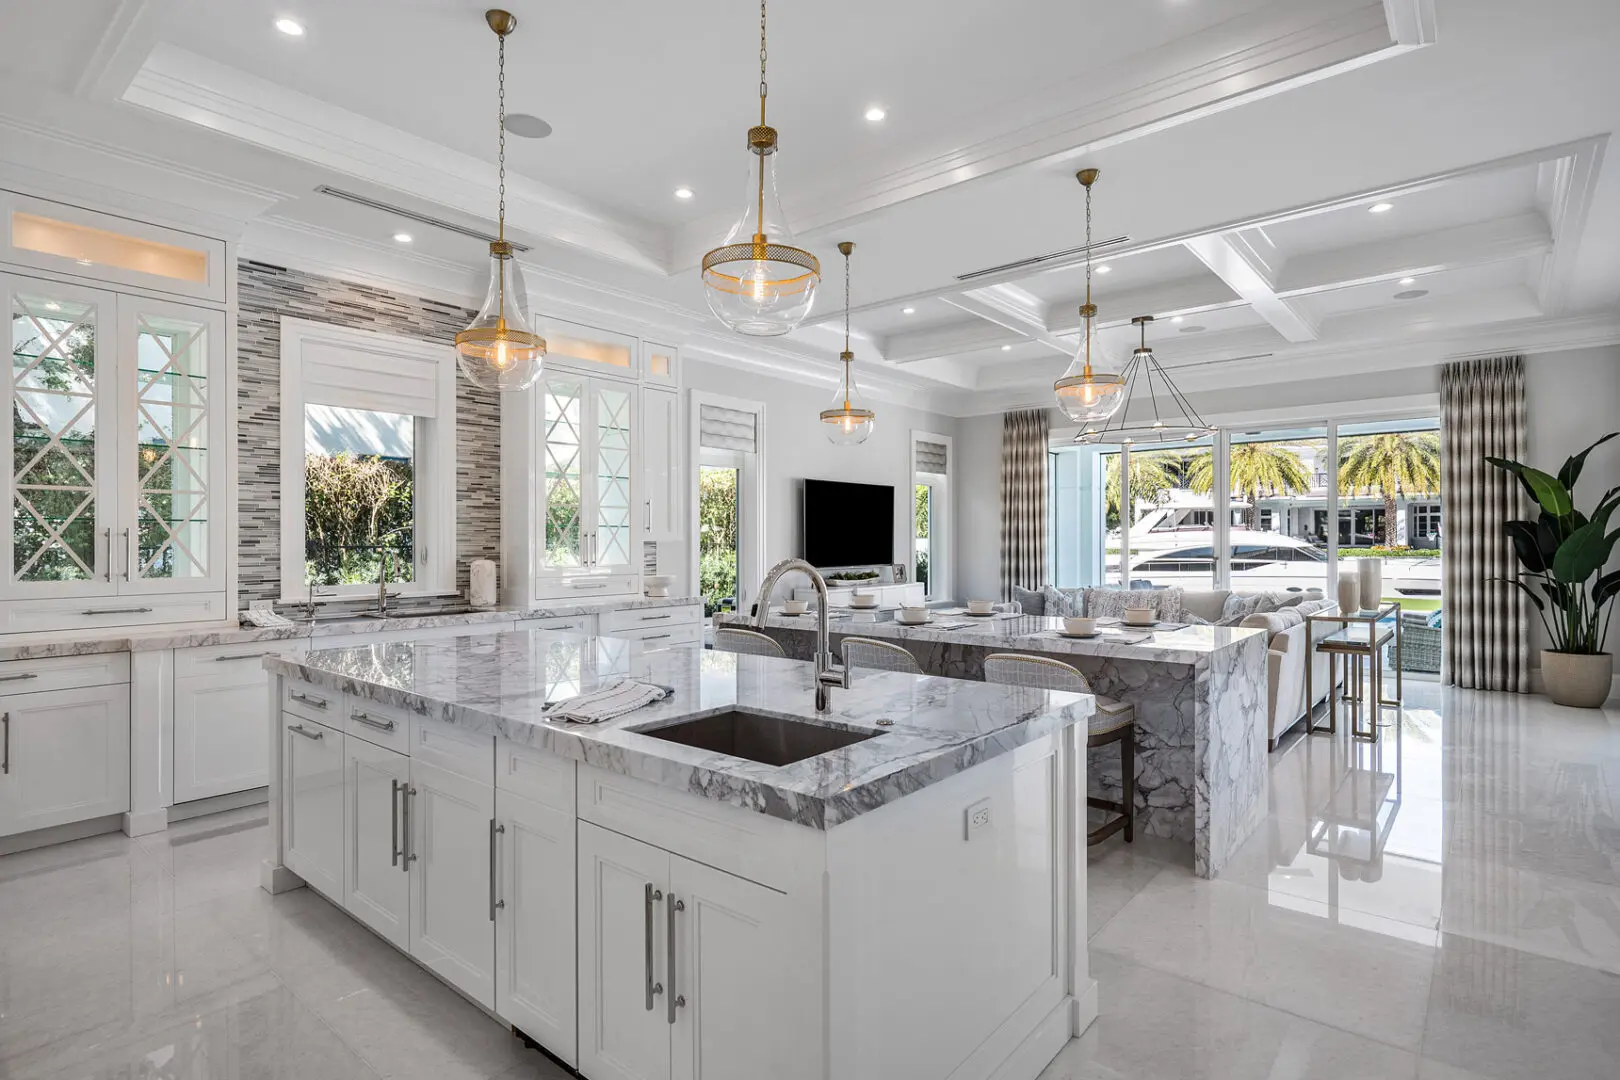 A large kitchen with white cabinets and marble countertops.